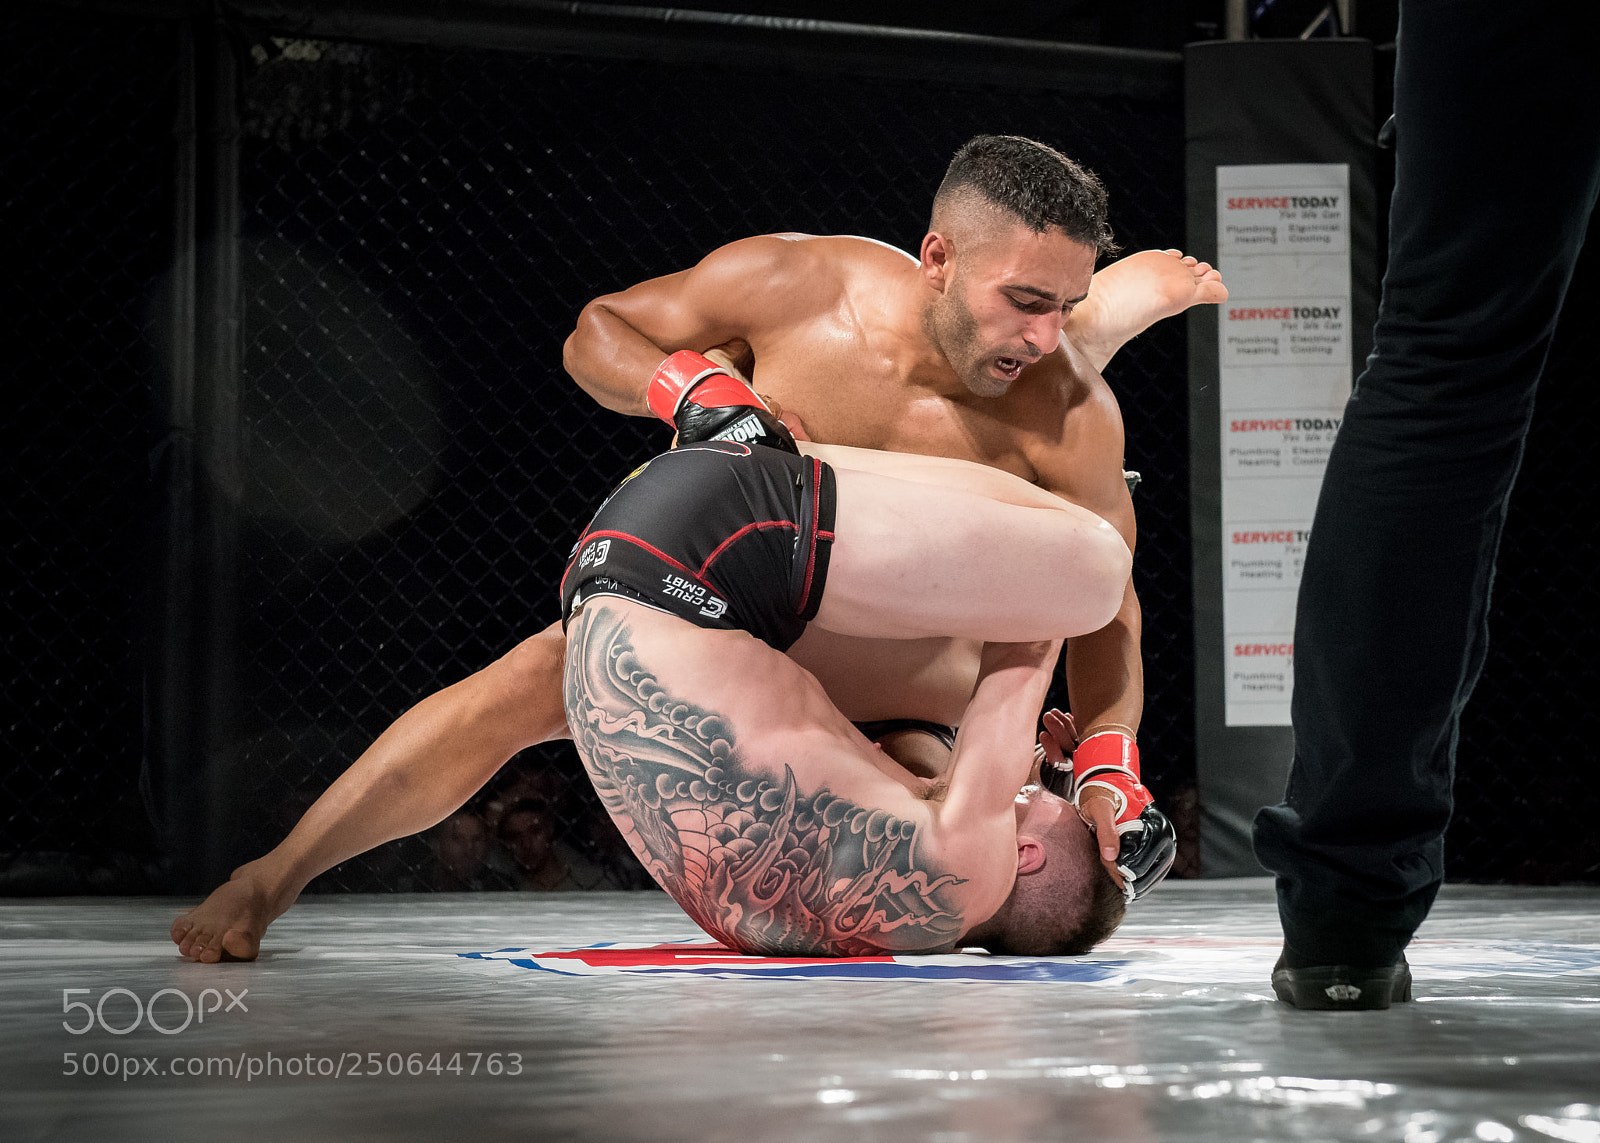 Nikon D810 sample photo. Grappling in an mma photography